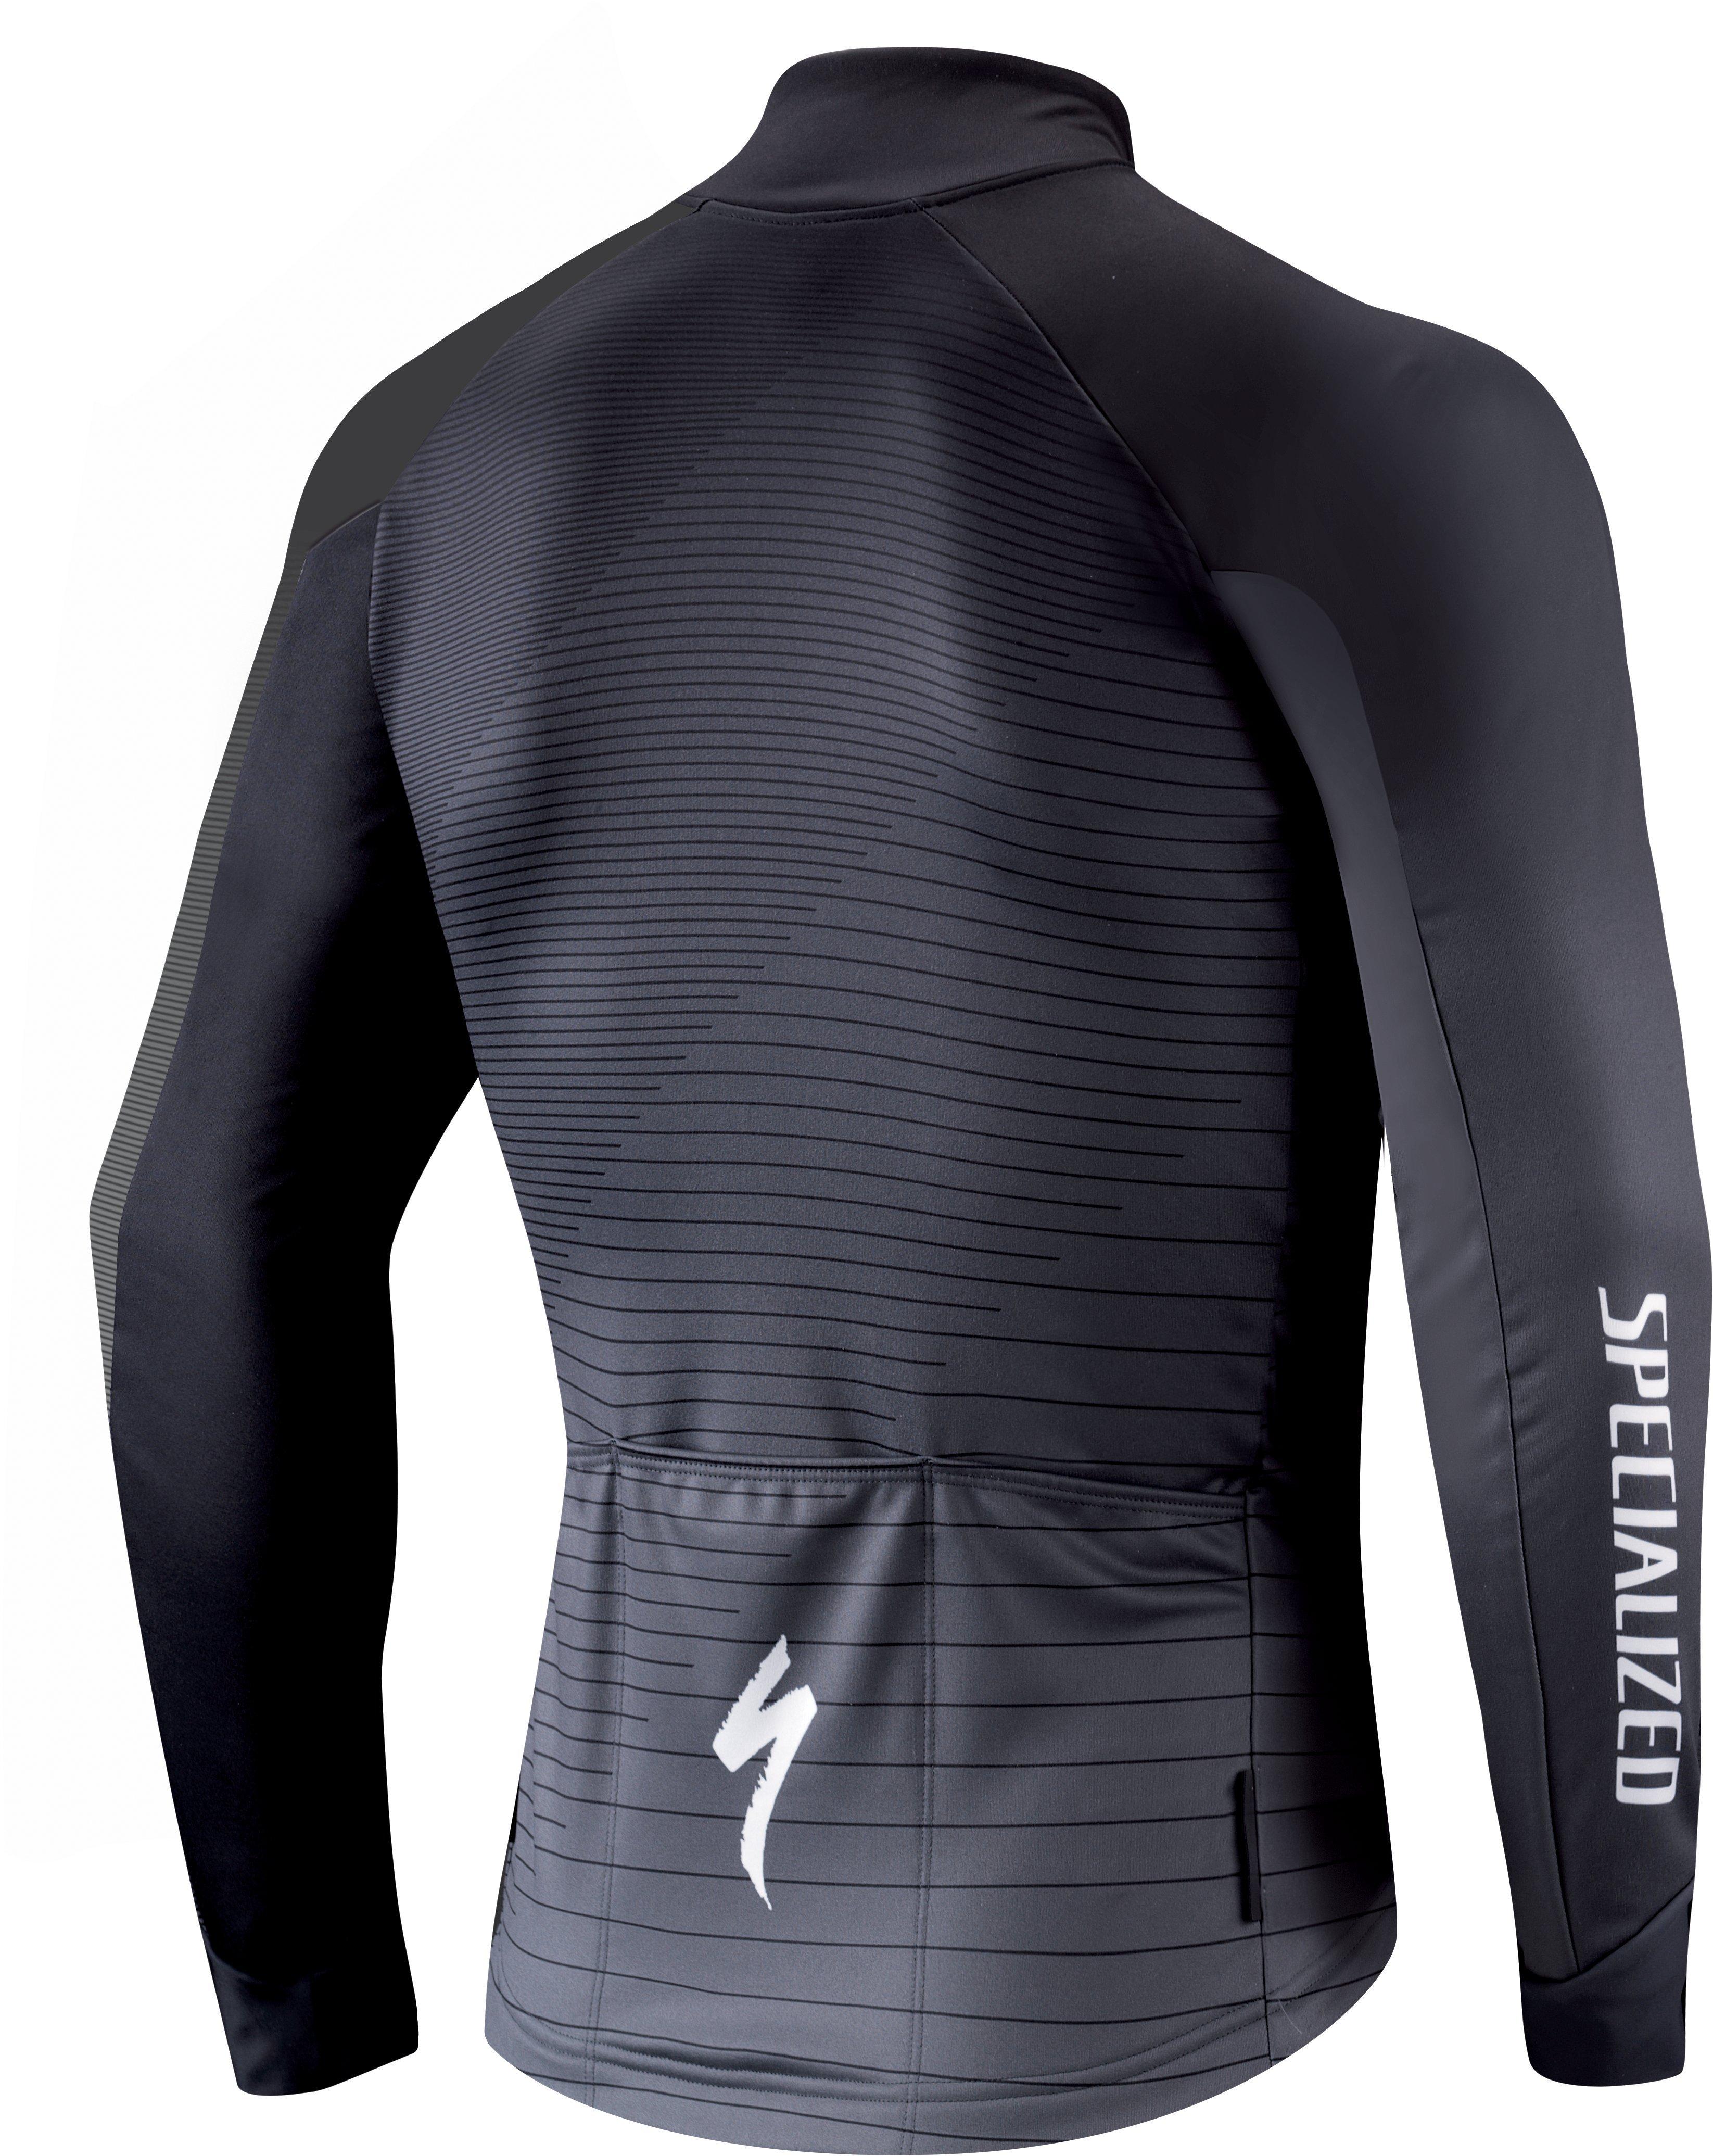 SPECIALIZED RBX COMP LOGO TEAM GILLET - Pro-M Store